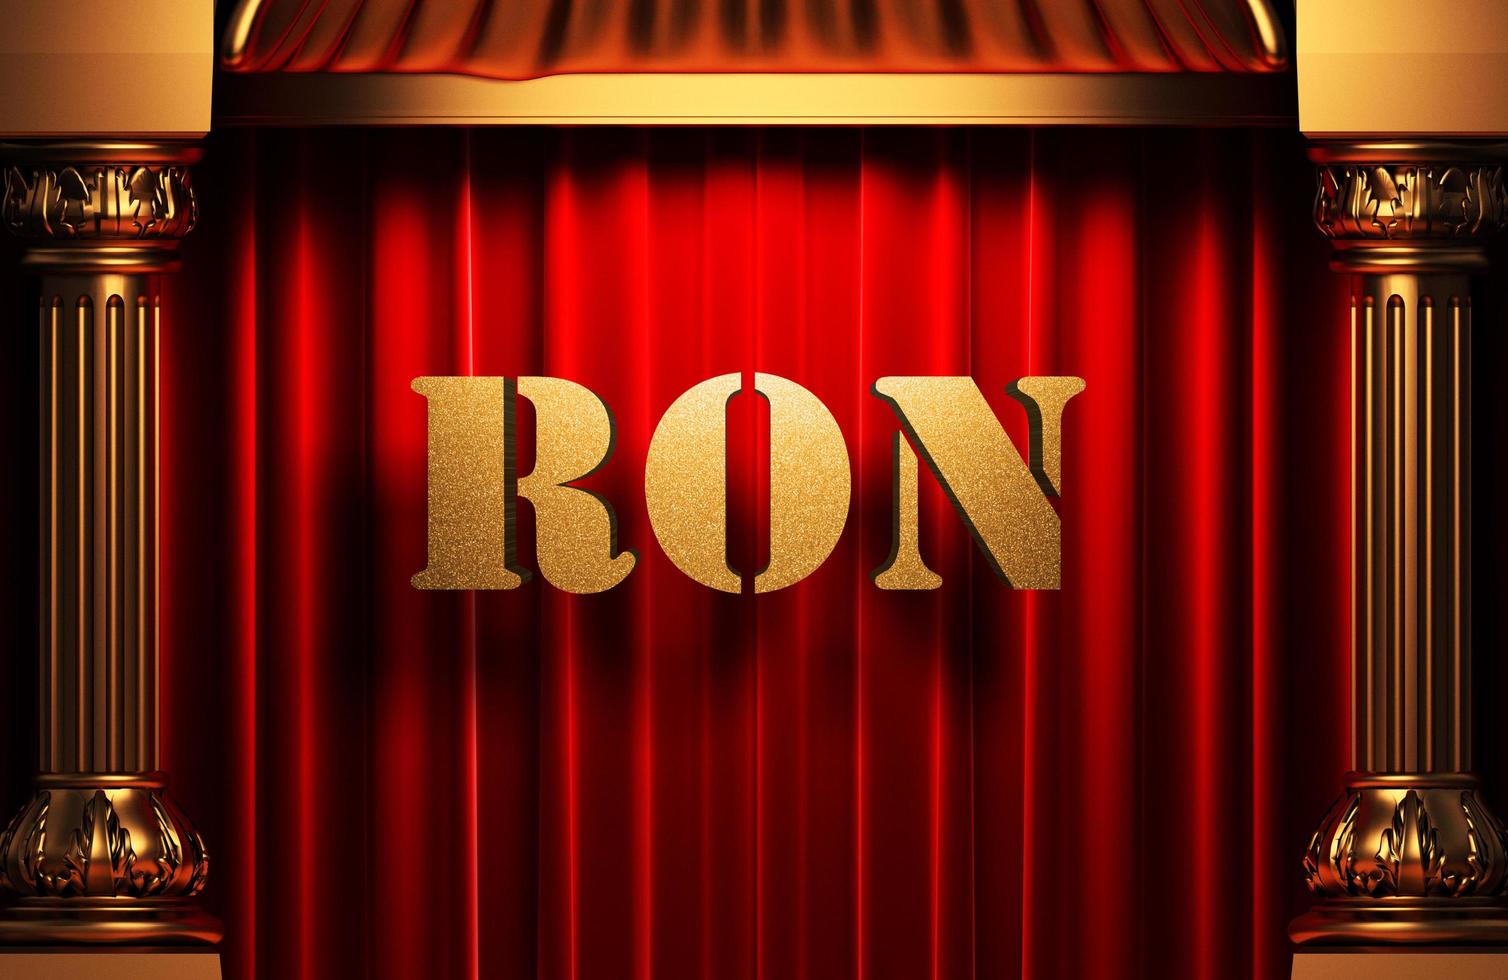 ron golden word on red curtain photo